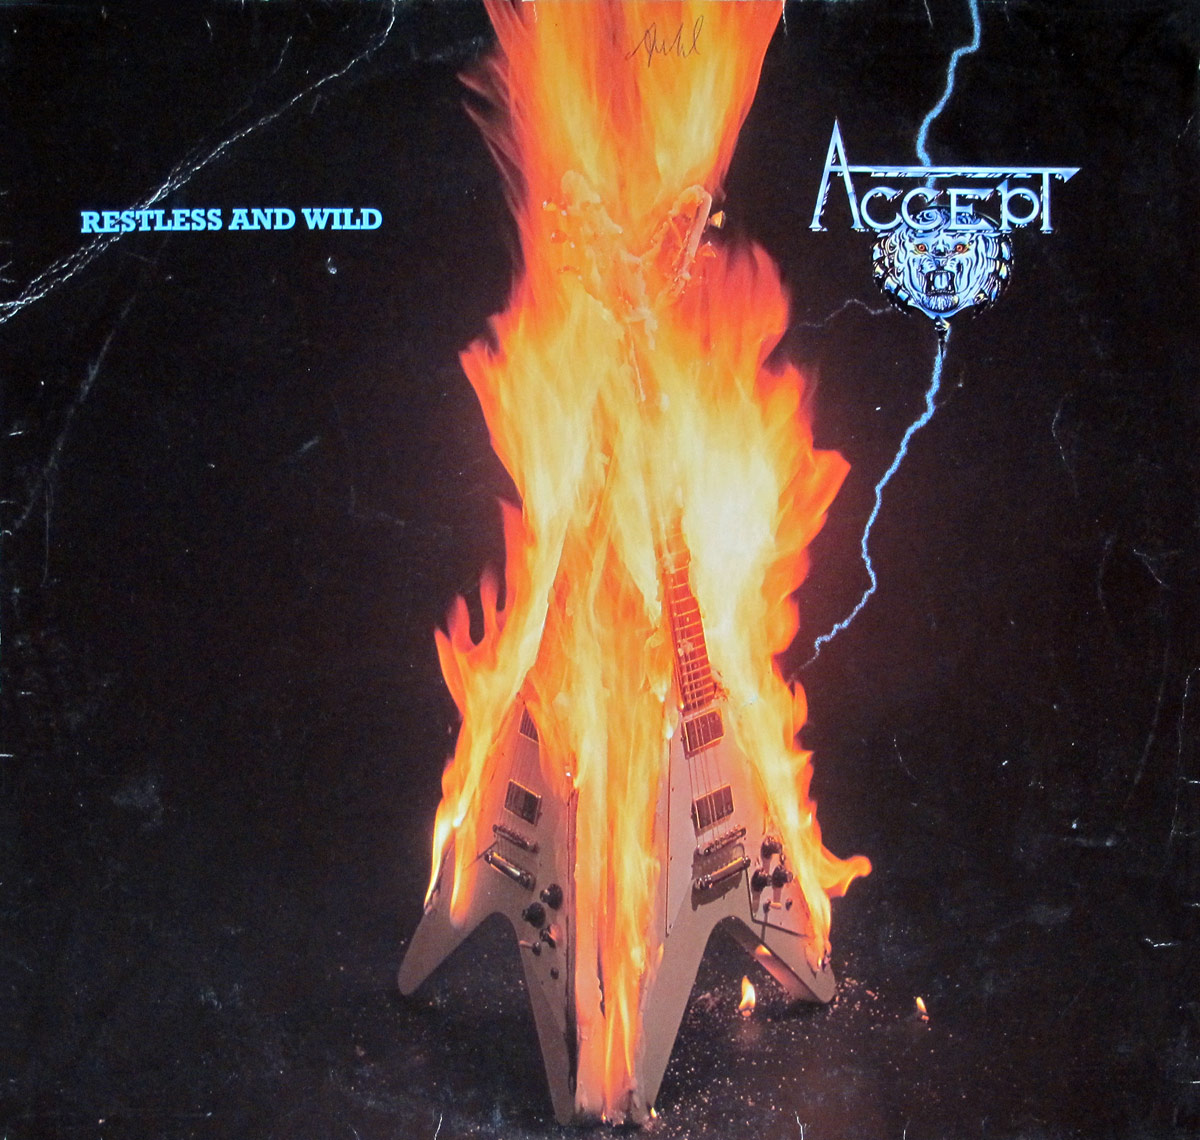 Two burning Gibson Flying V's burning into flames of the album front cover of "Restless and Wild" by Accept.  